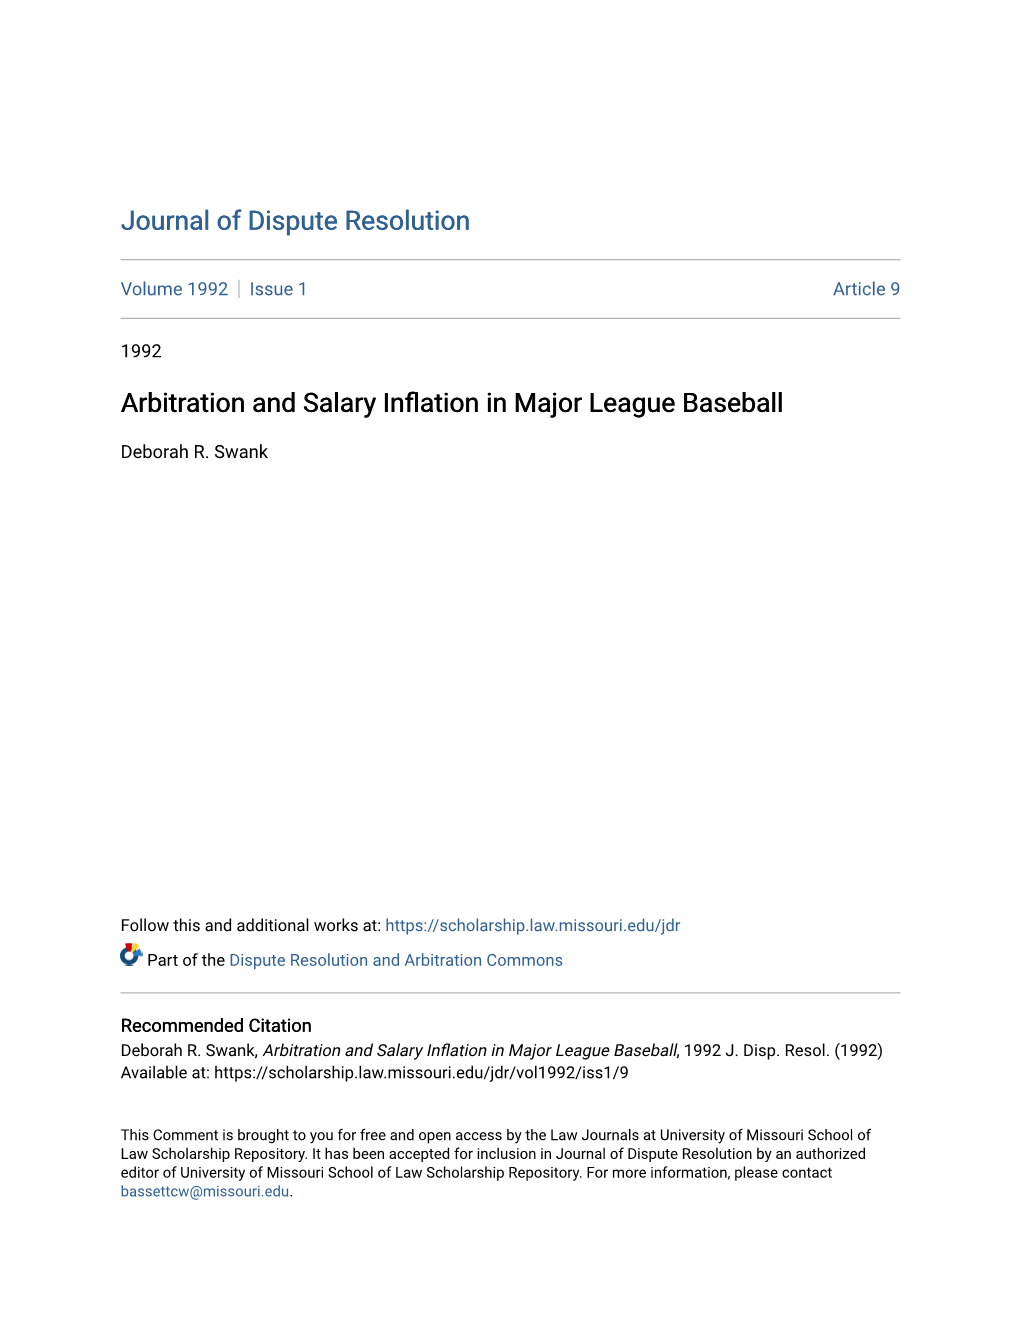 Arbitration and Salary Inflation in Major League Baseball